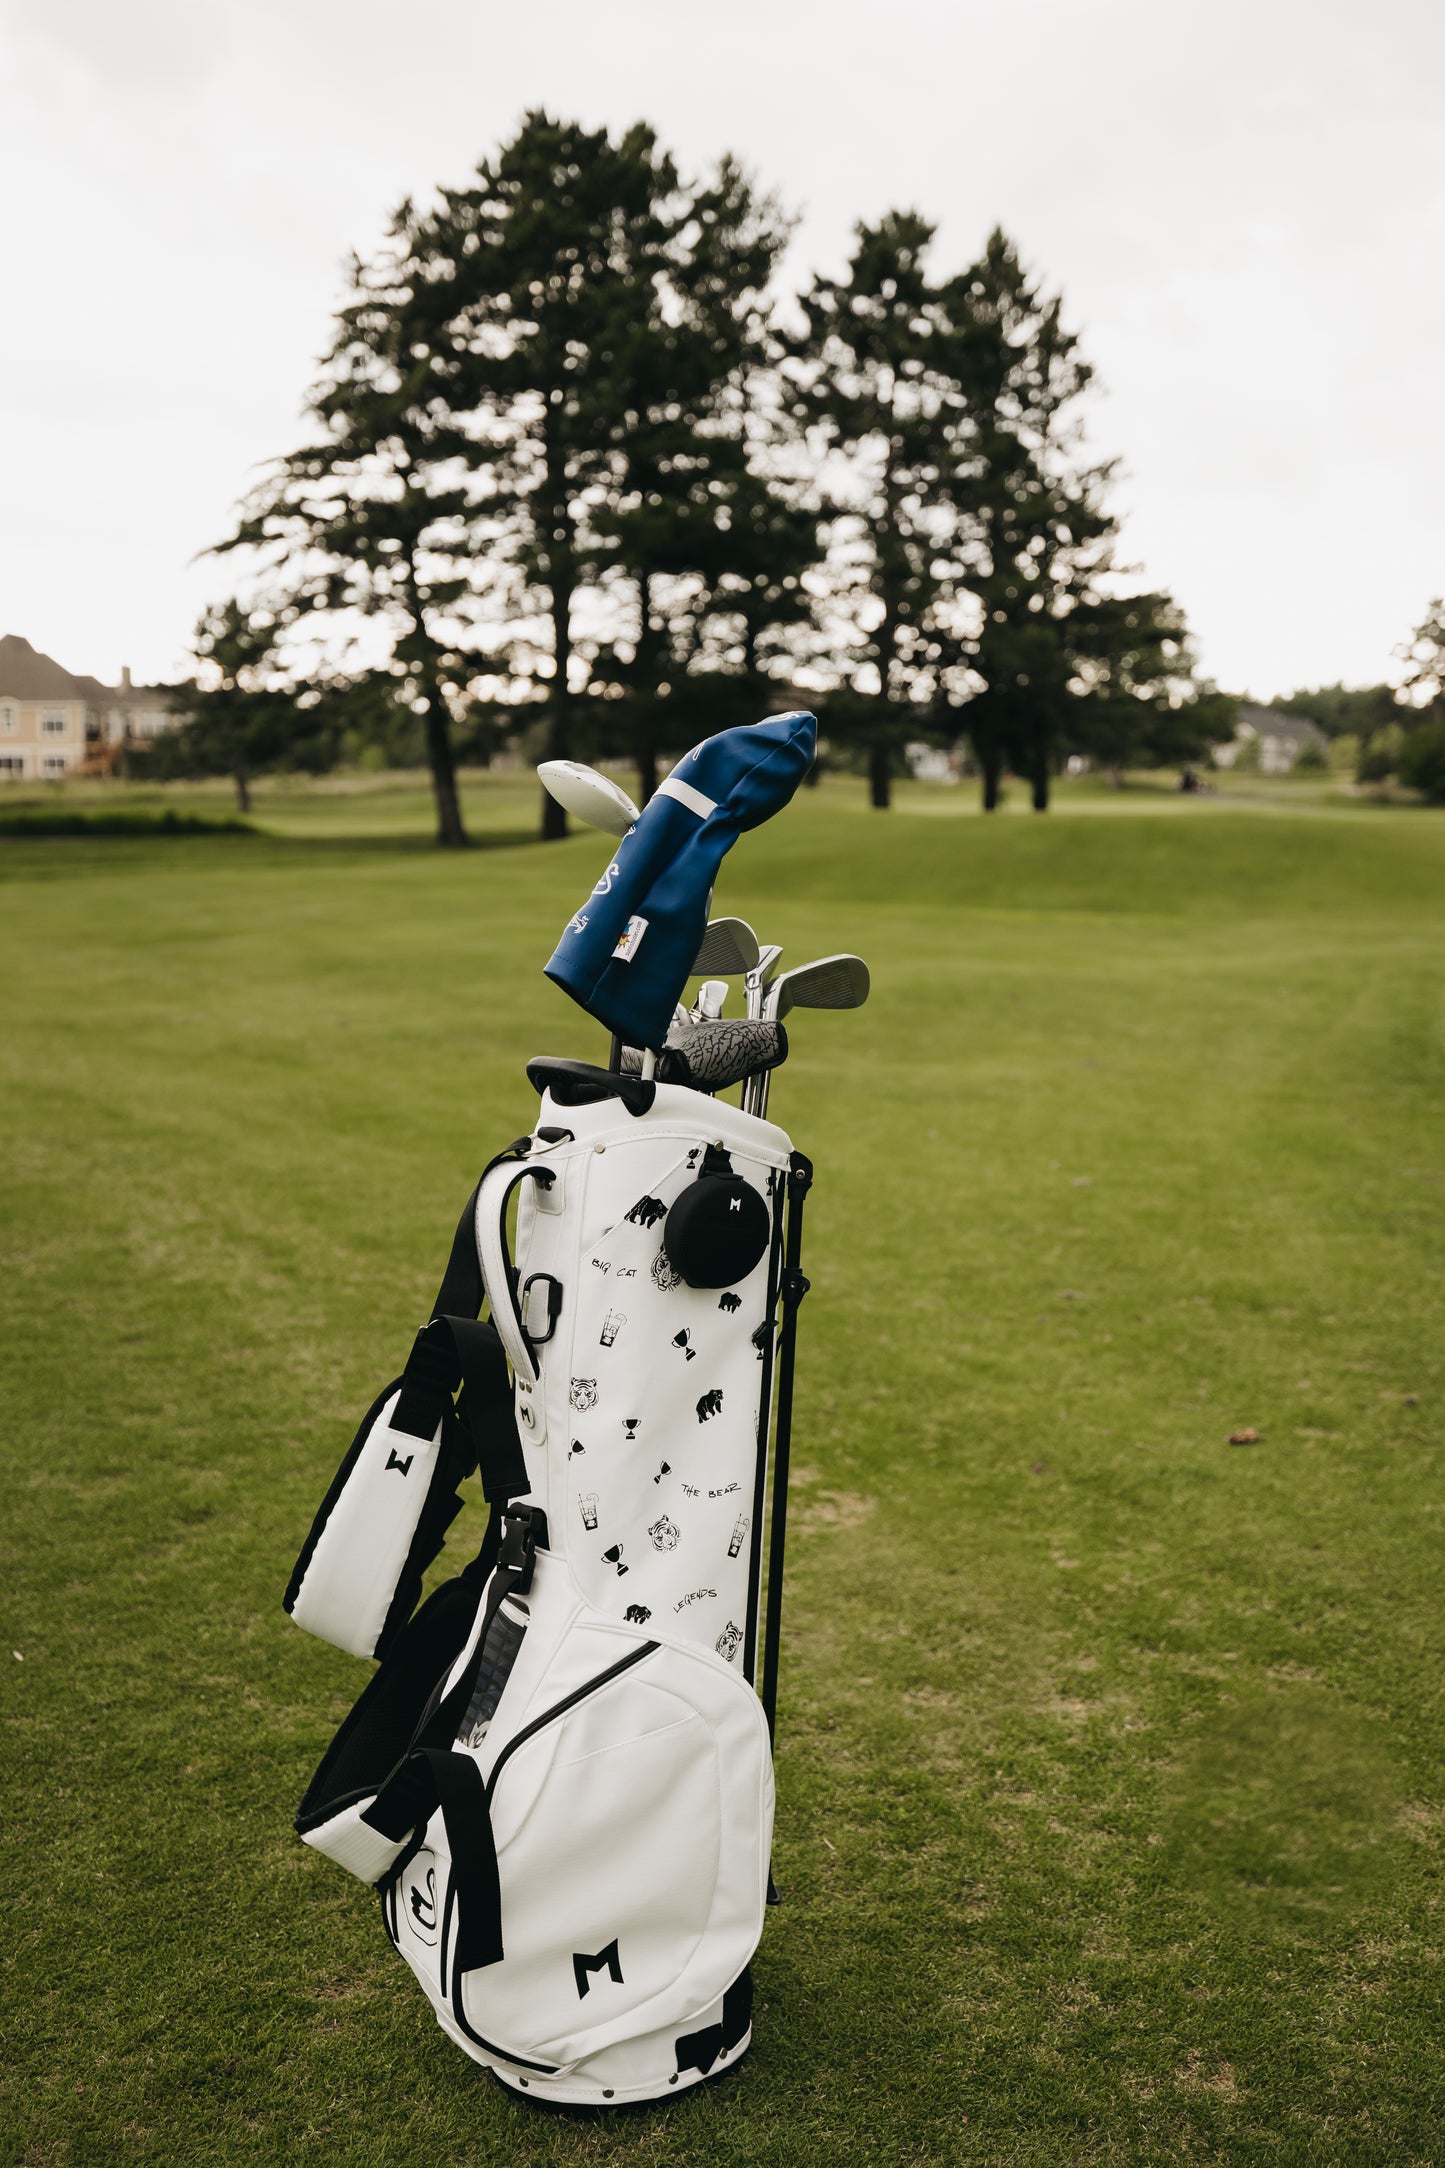 MNML GOLF and Swannies collaboration features MNML GOLF's white MV2 golf bag and Swannies company graphics.